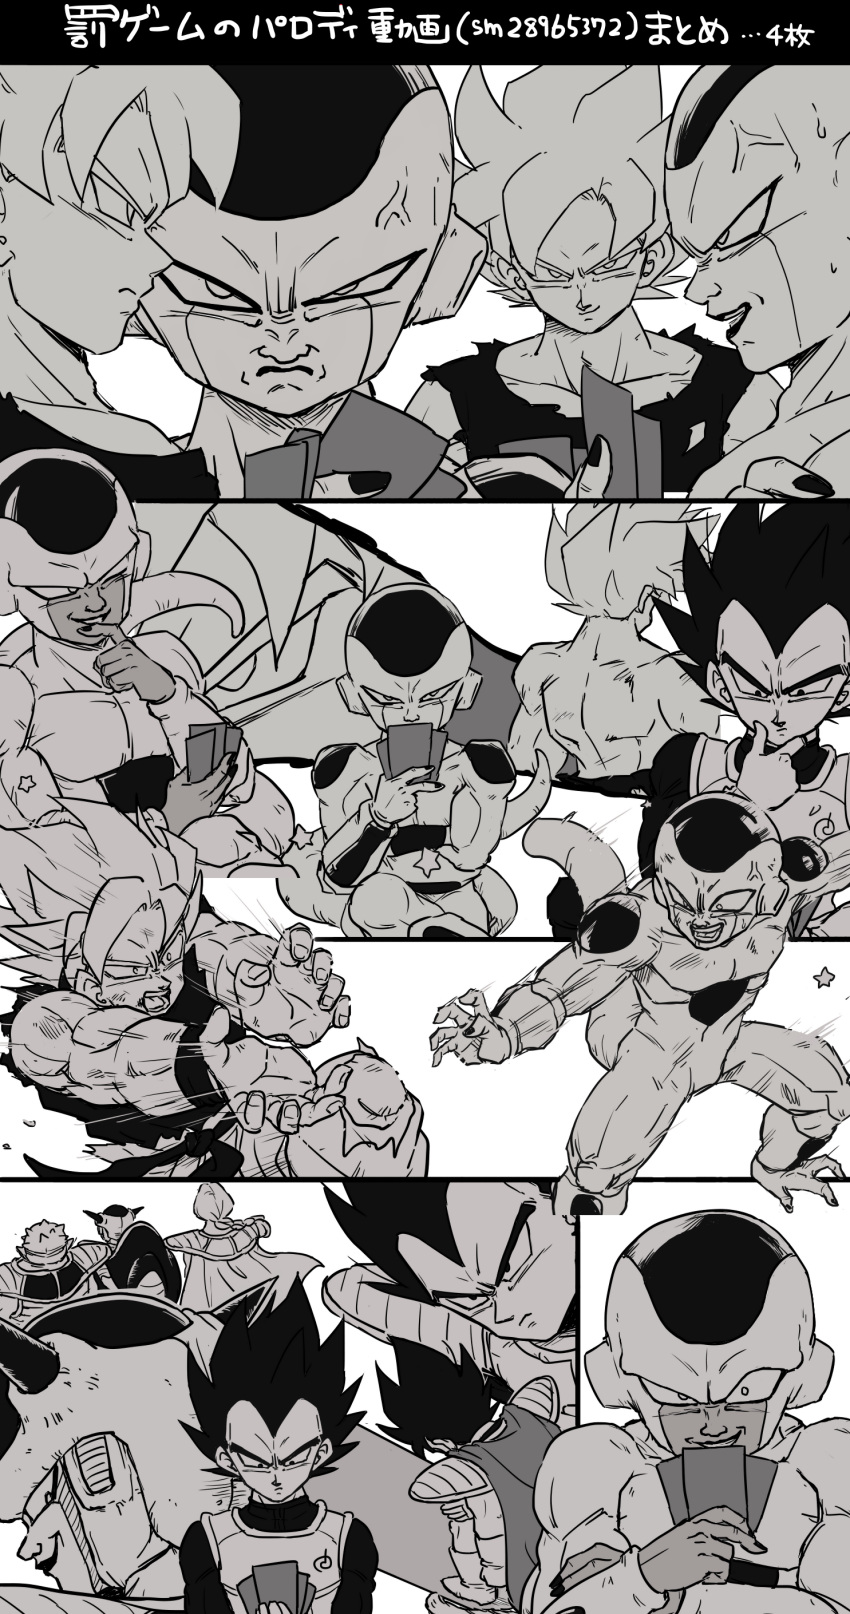 5boys ;) absurdres annoyed back_turned black_eyes black_hair card dodoria dragon_ball dragon_ball_z_fukkatsu_no_f dragonball_z fighting_stance frieza frown golden_frieza hand_on_own_chin highres looking_at_another looking_at_viewer looking_back monochrome multiple_boys nervous one_eye_closed open_mouth serious simple_background smile son_gokuu spiky_hair star super_saiyan sweatdrop tkgsize translation_request vegeta white_background zarbon